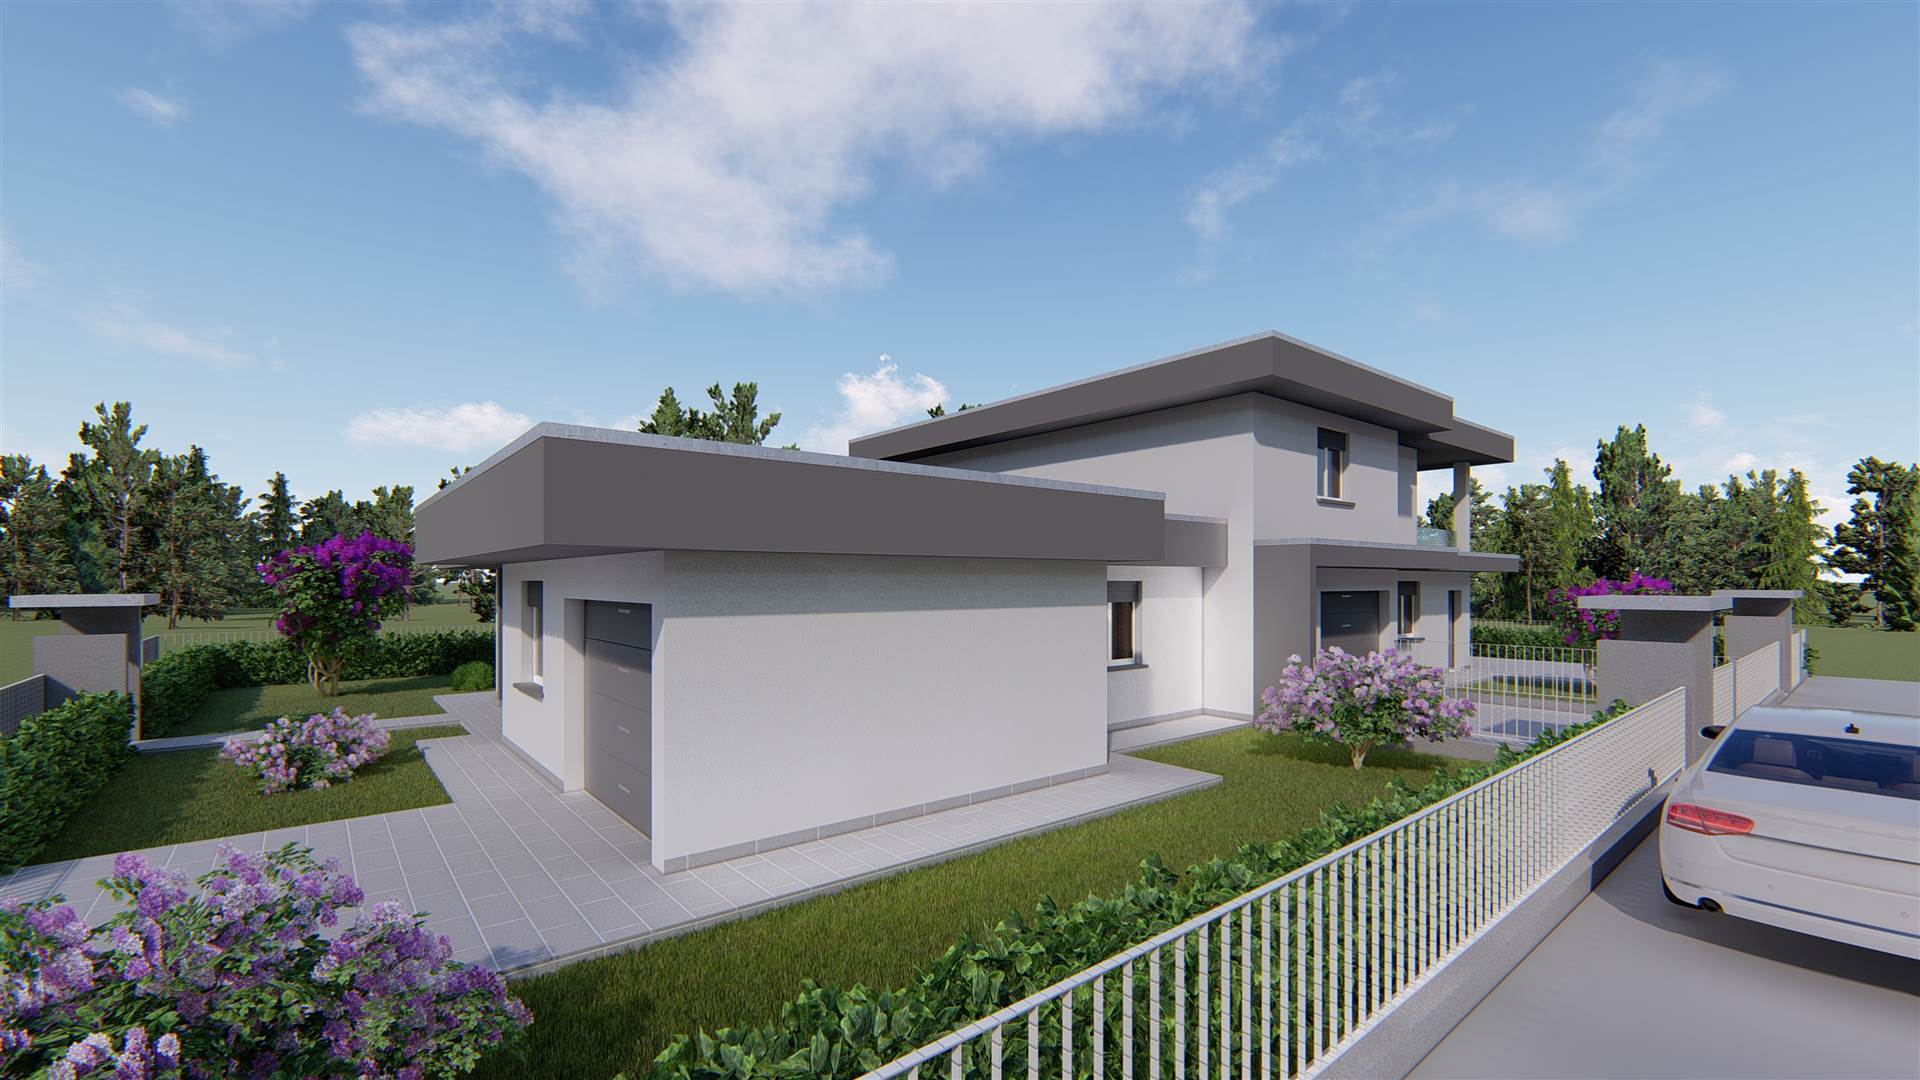 CISERANO, Villa for sale of 97 Sq. mt., New construction, Heating Individual heating system, Energetic class: A4, placed at Ground, composed by: 4 